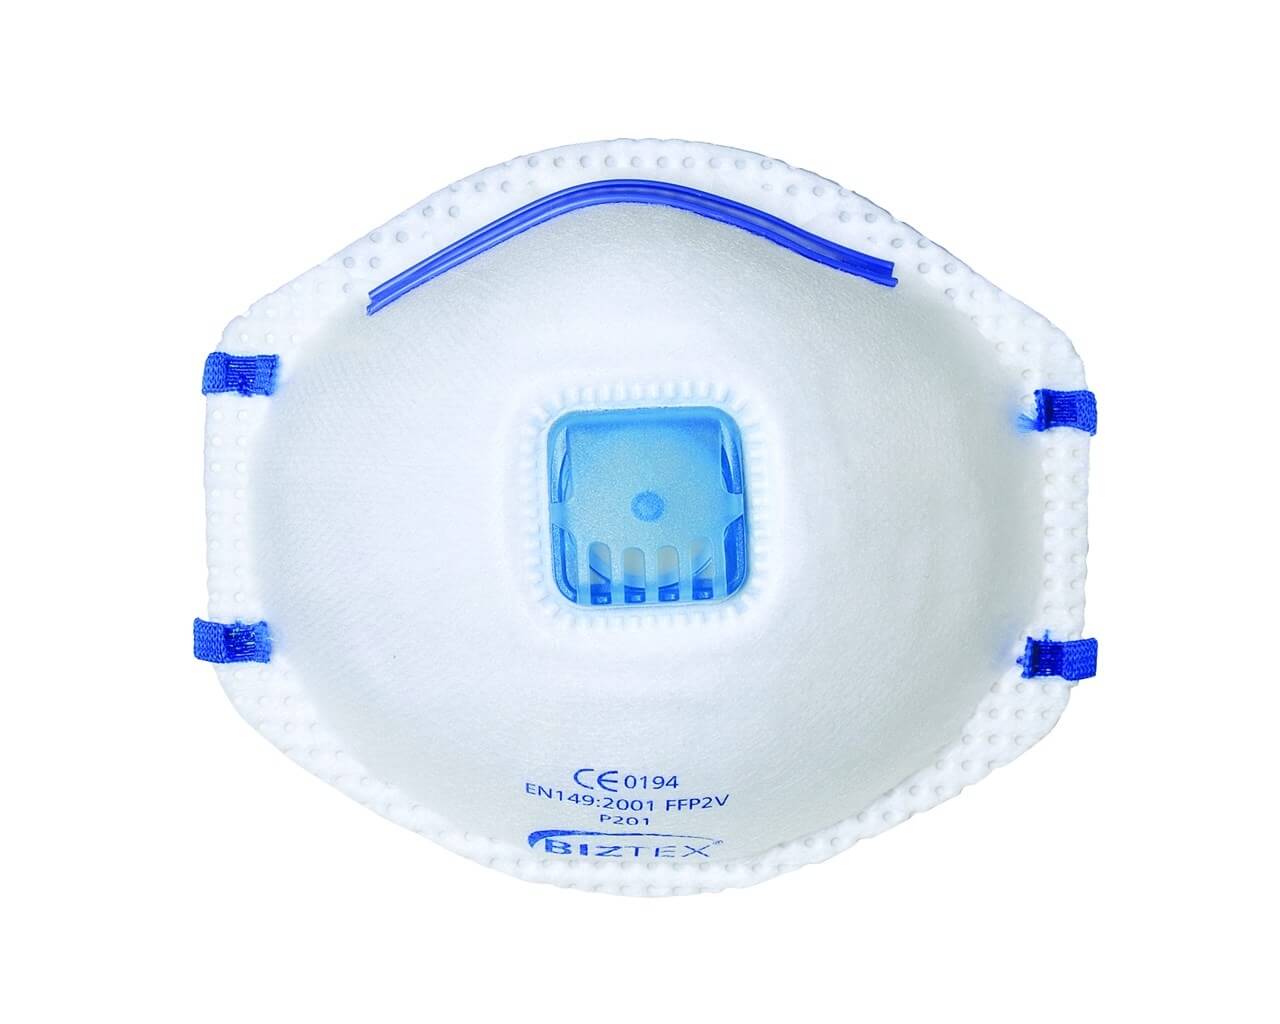 Cup Valved (Face Mask) Respirator, N95